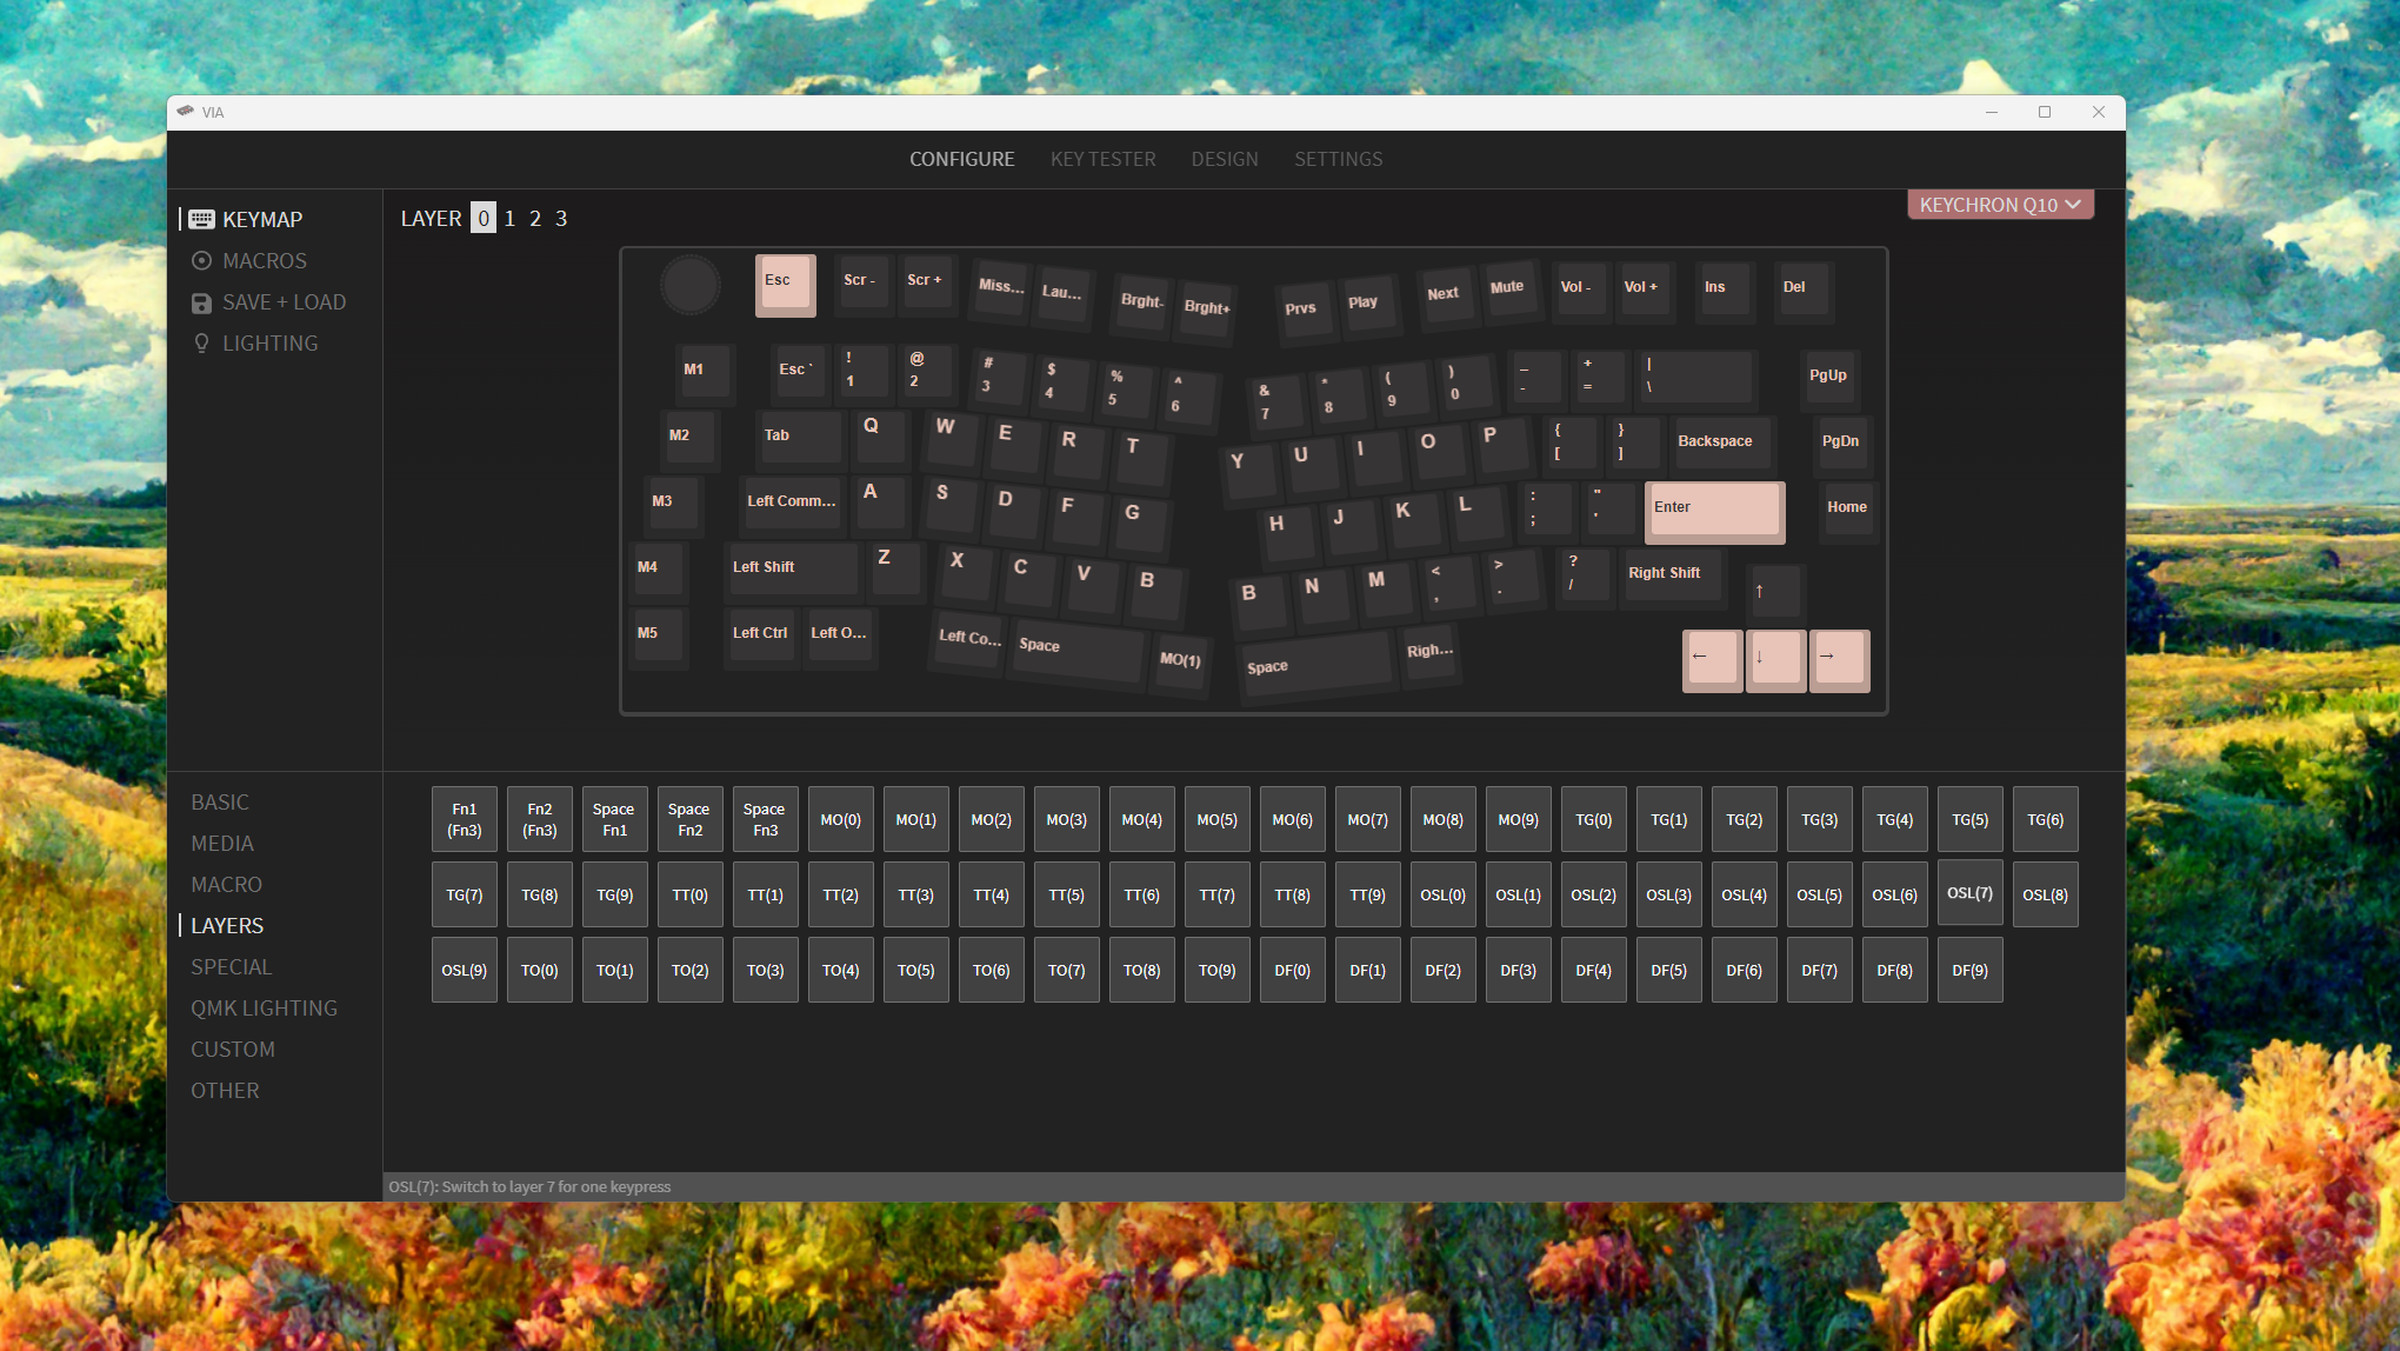 Screenshot of the VIA software showing the Keychron Q10. Several modifier keys have been remapped: Esc is where tilde lives, caps lock has been replaced with left command, and backspace is down a row.